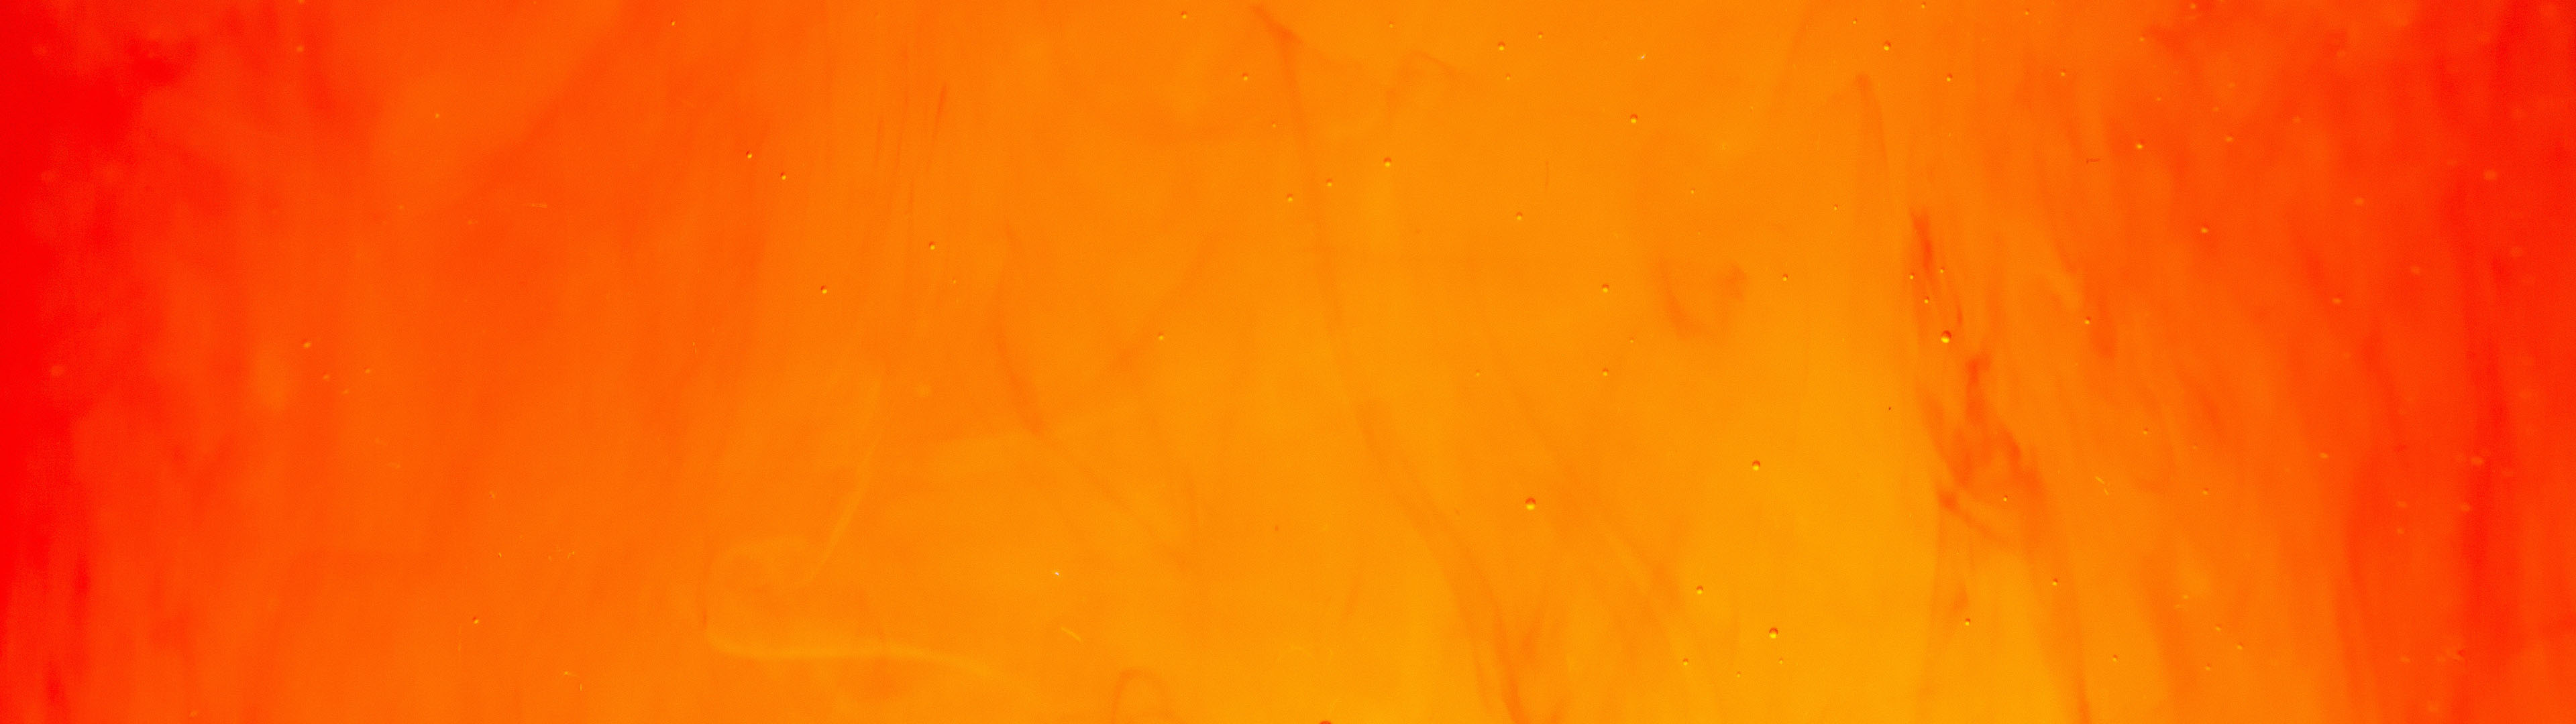 3840x1080 orange wallpaper 3840x1080 with high quality and resolution